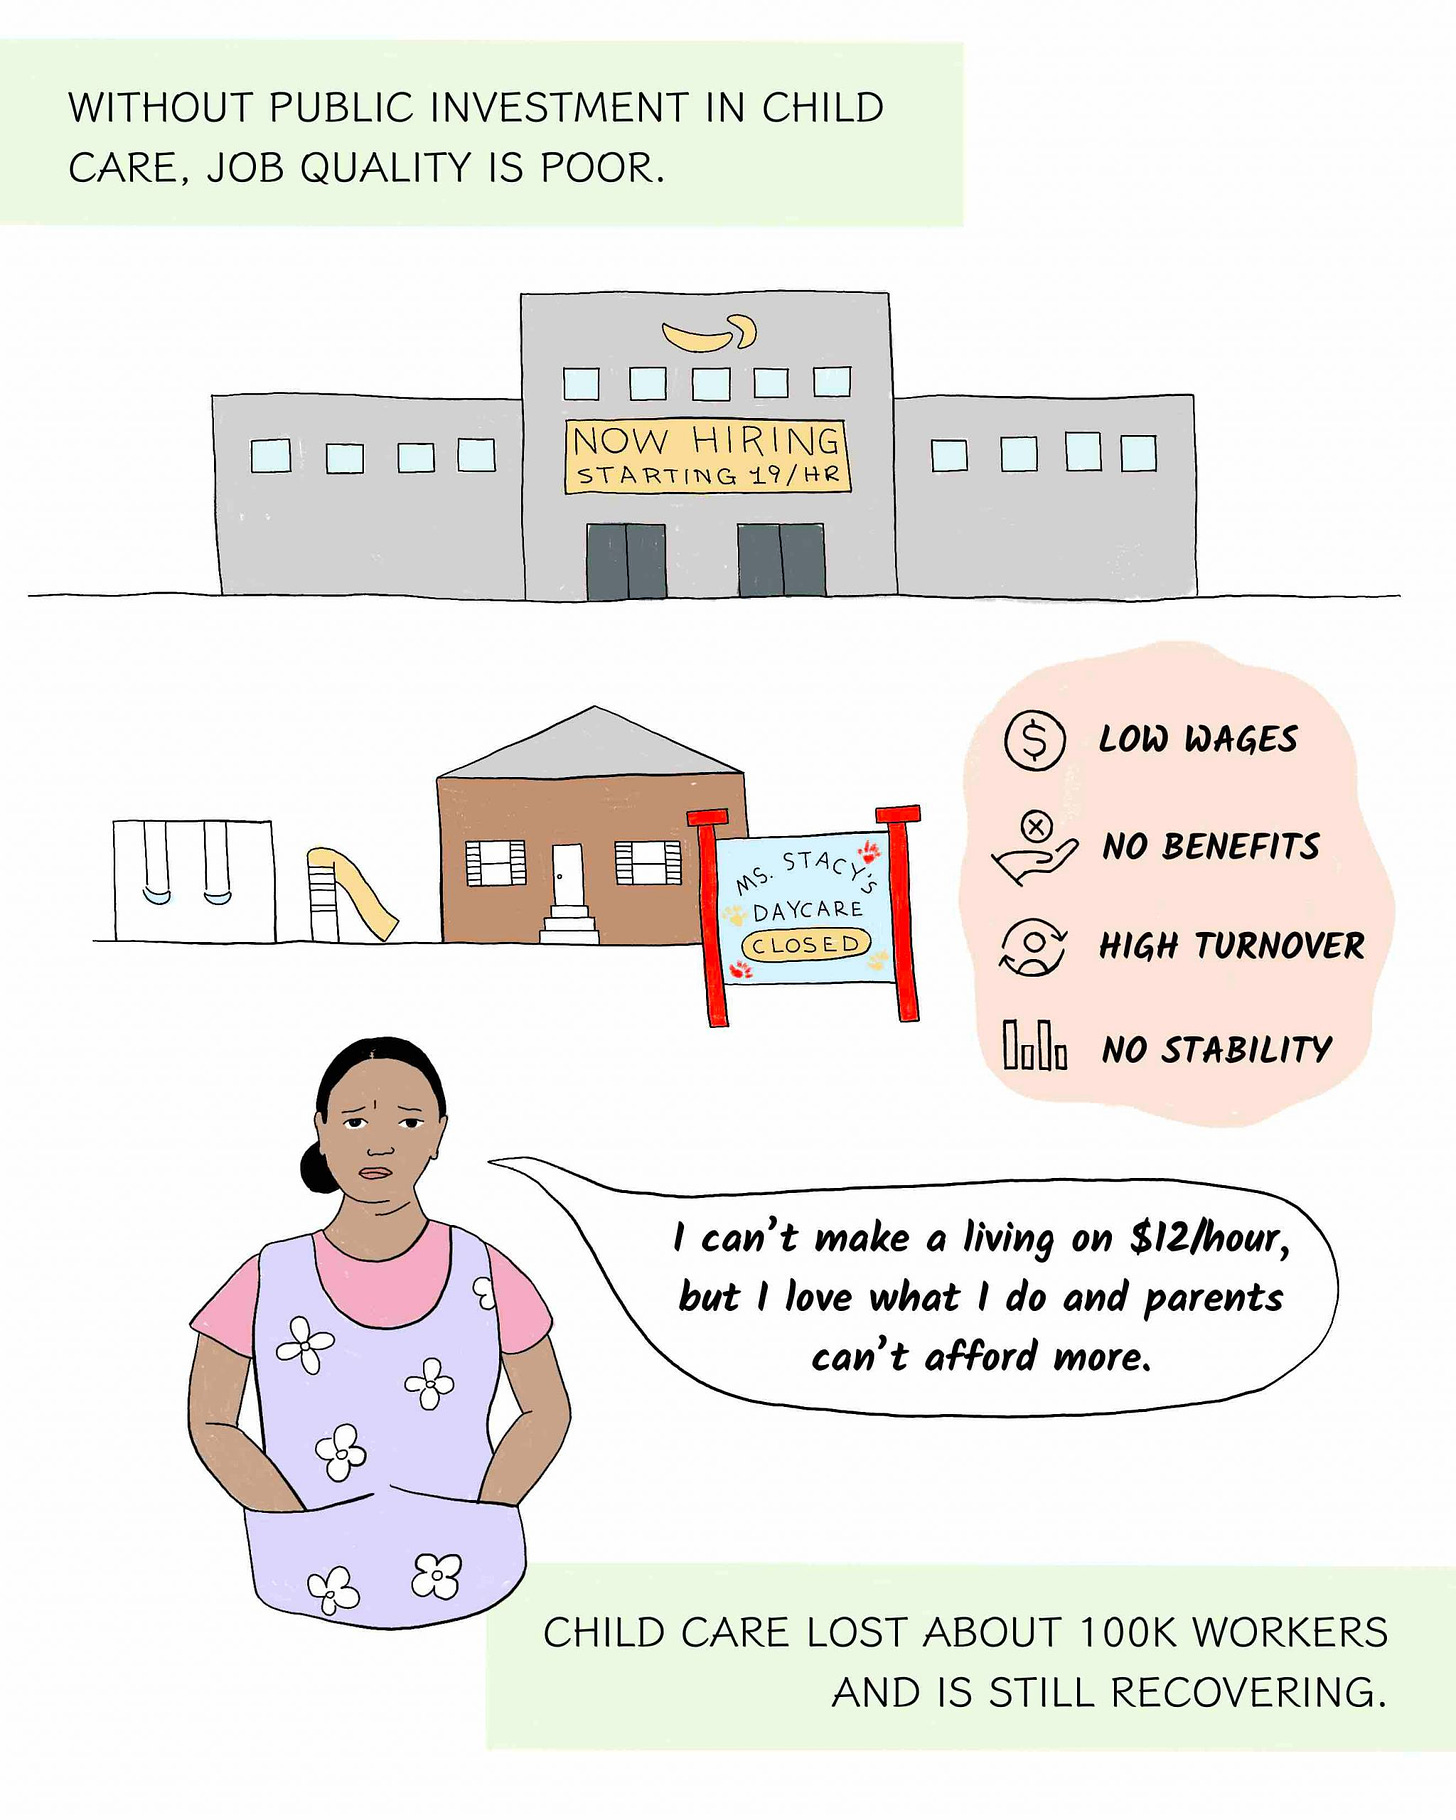 WITHOUT PUBLIC INVESTMENT IN CHILD CARE, JOB QUALITY IS POOR. CHILD CARE LOST ABOUT 100K WORKERS AND IS STILL RECOVERING. A drawing of a building with a NOW HIRING banner, a day care with a closed sign, and a woman in apron. 